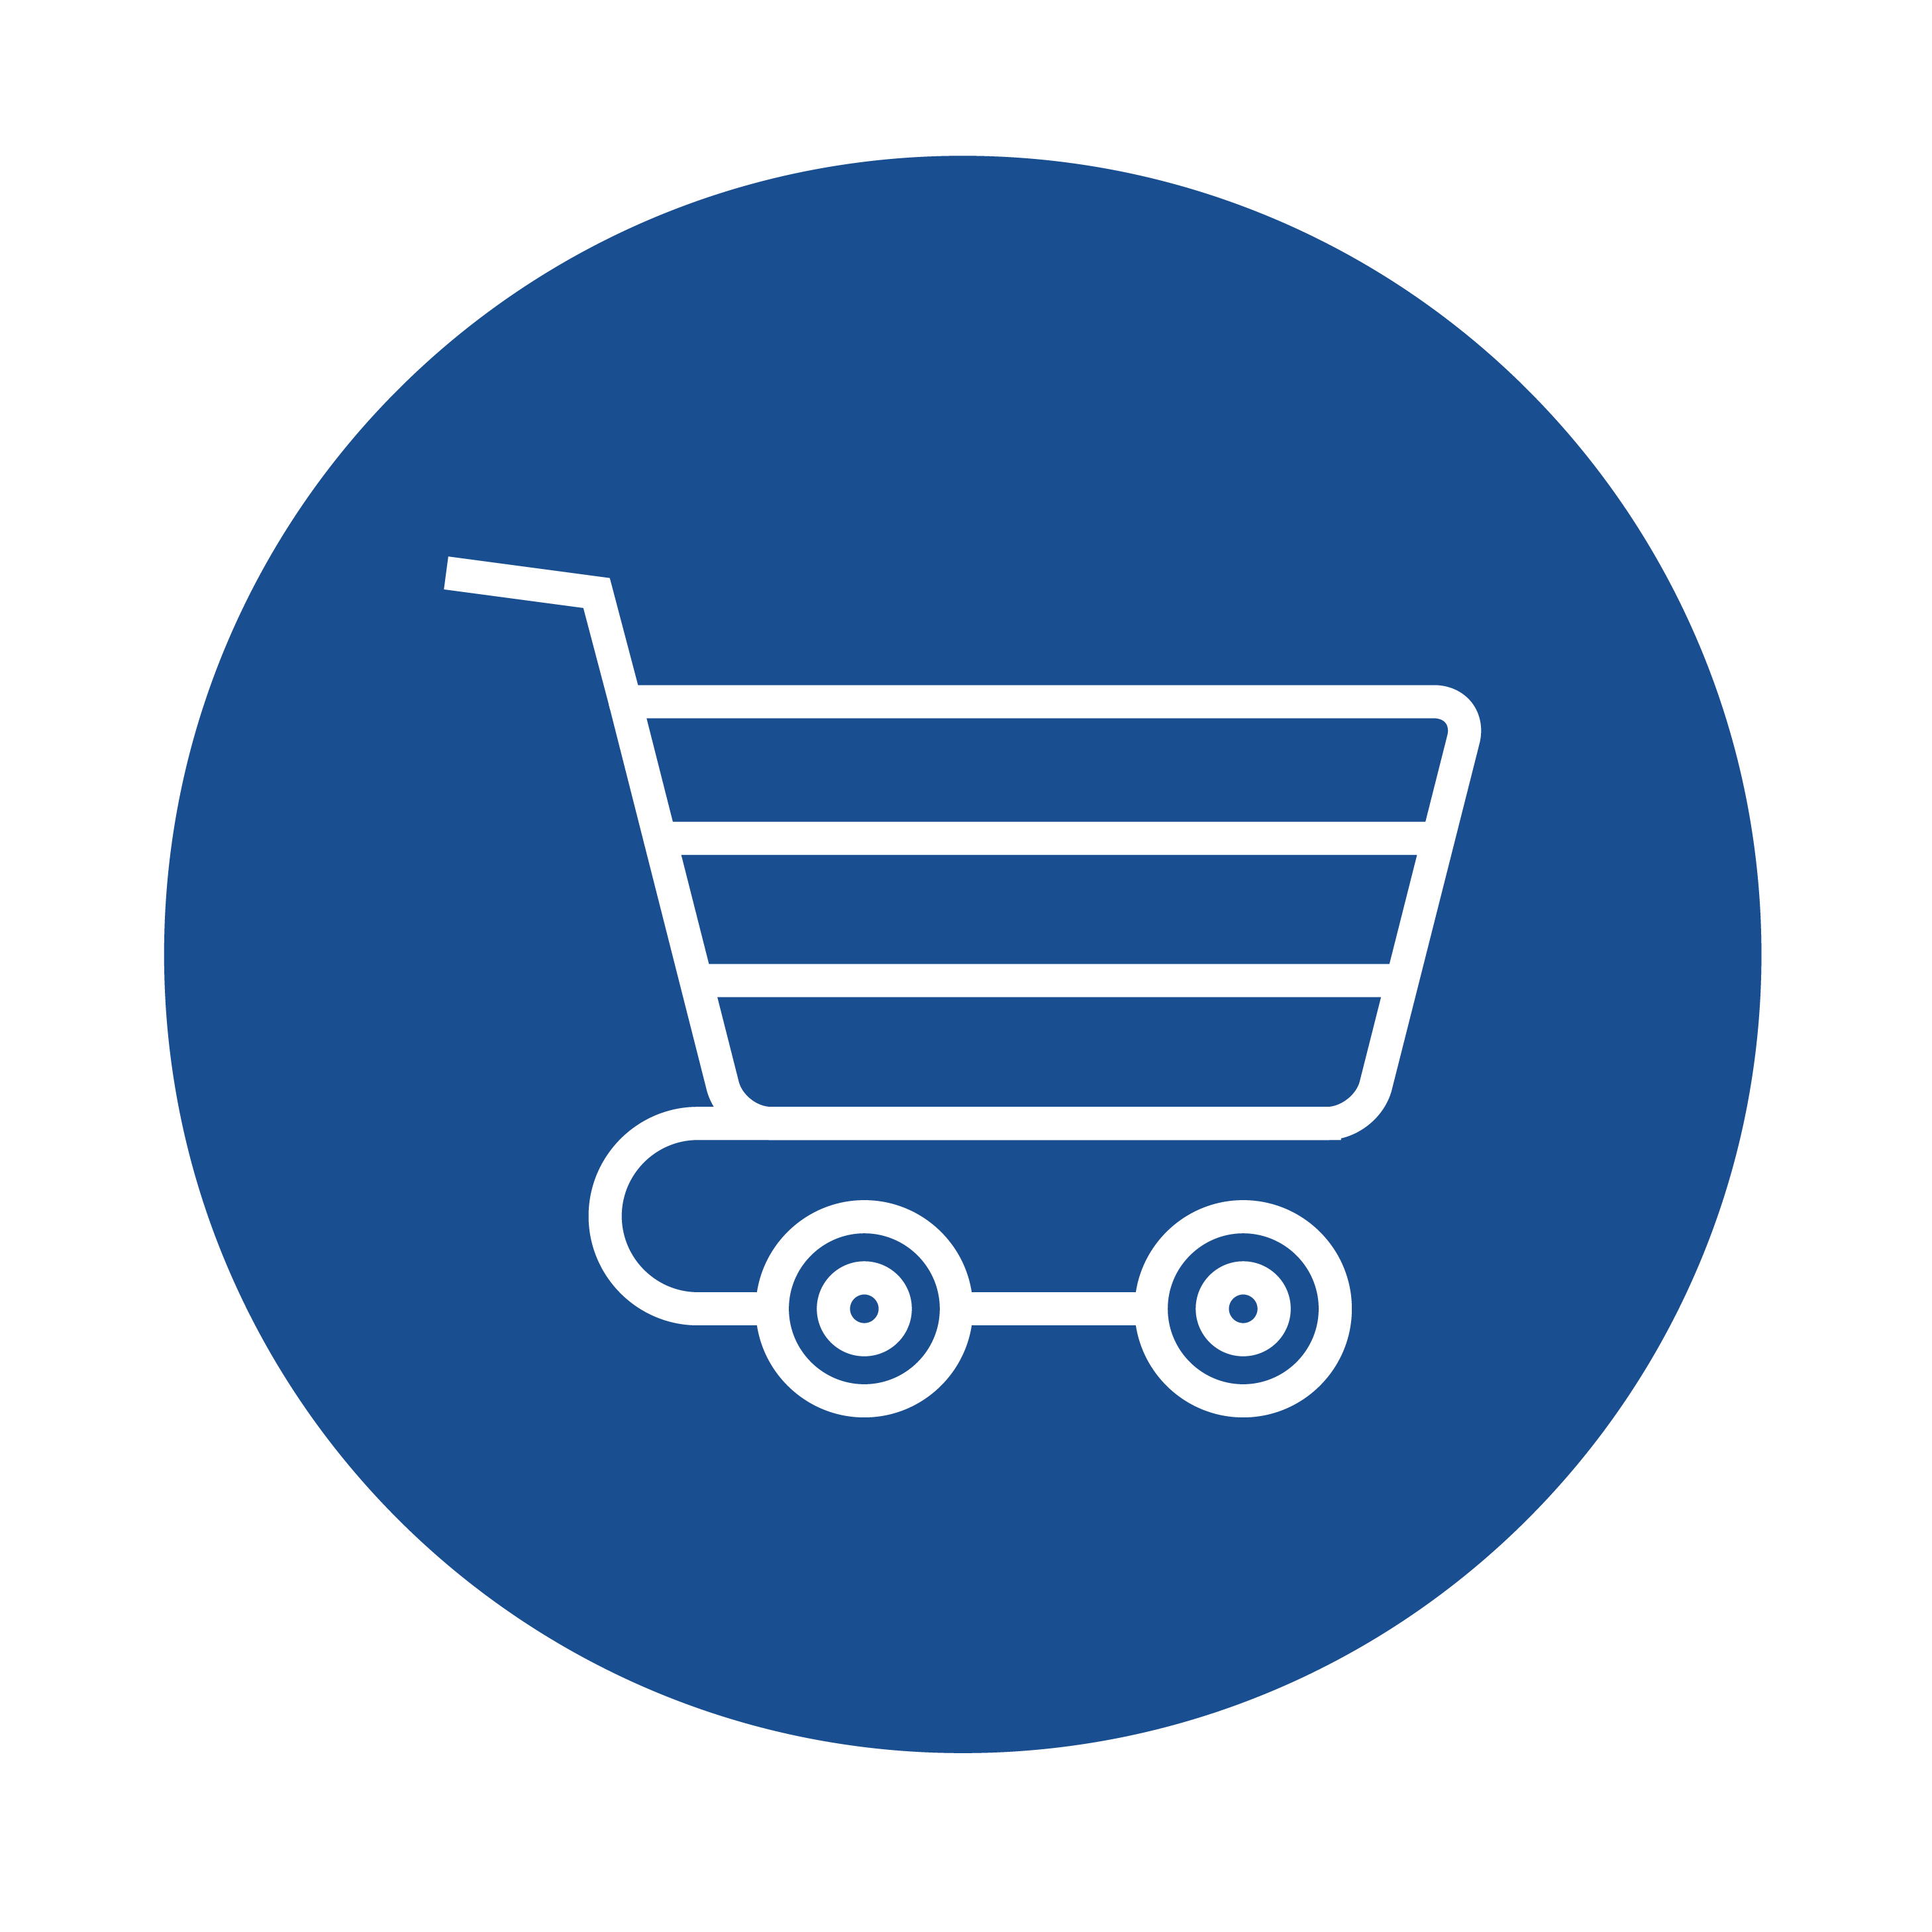 1GNITE internal marketplace solutions for grocery stores